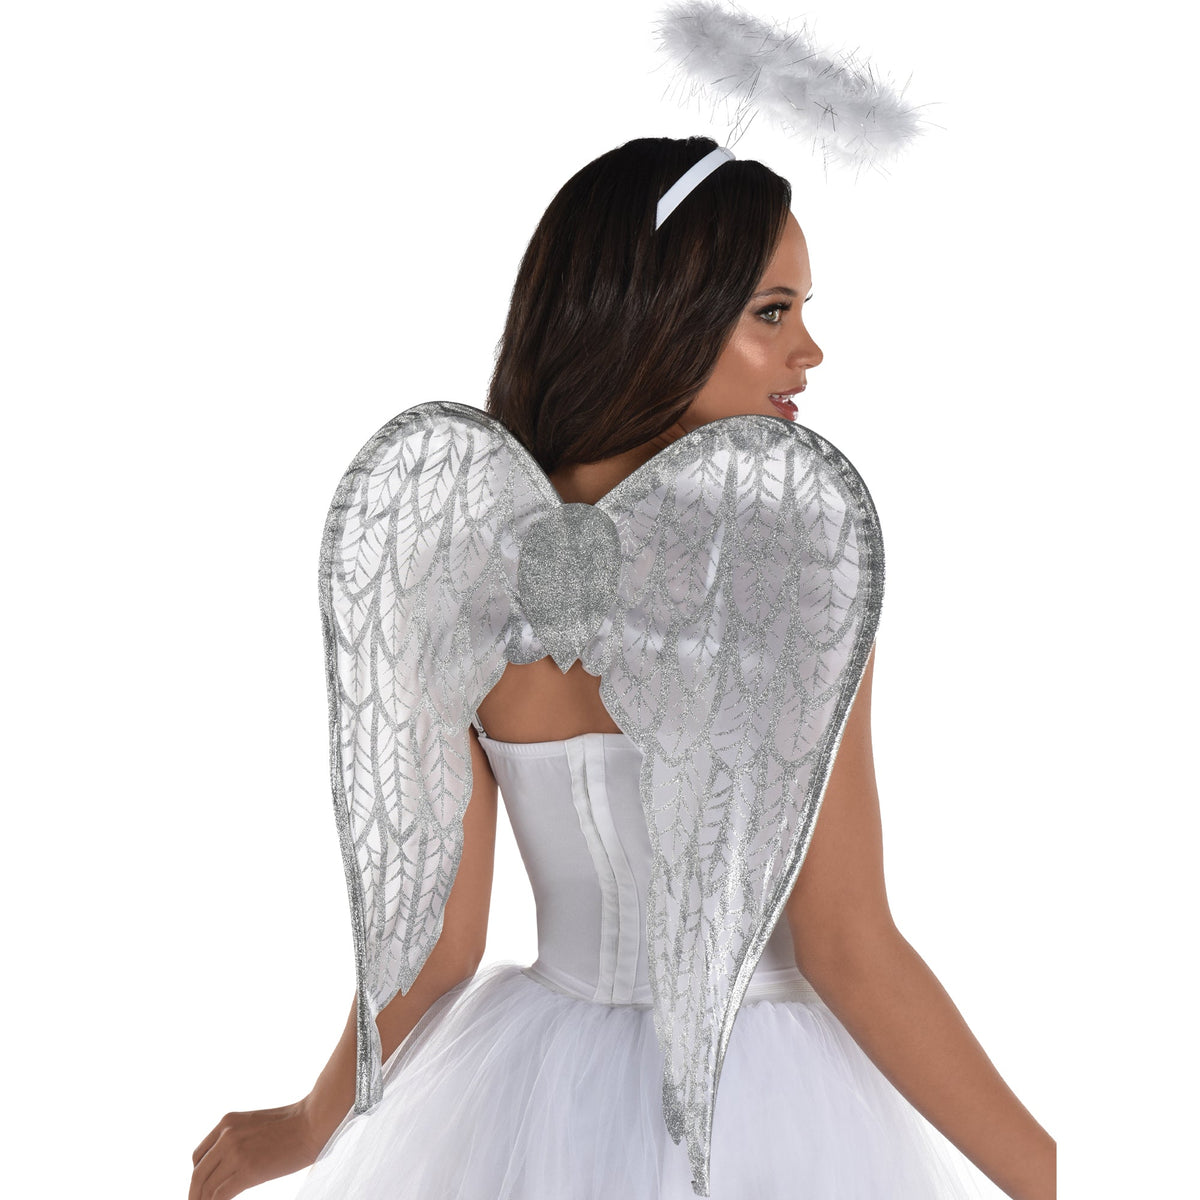 SUIT YOURSELF COSTUME CO. Costume Accessories Angel Wings and Halo for Adults 192937345955